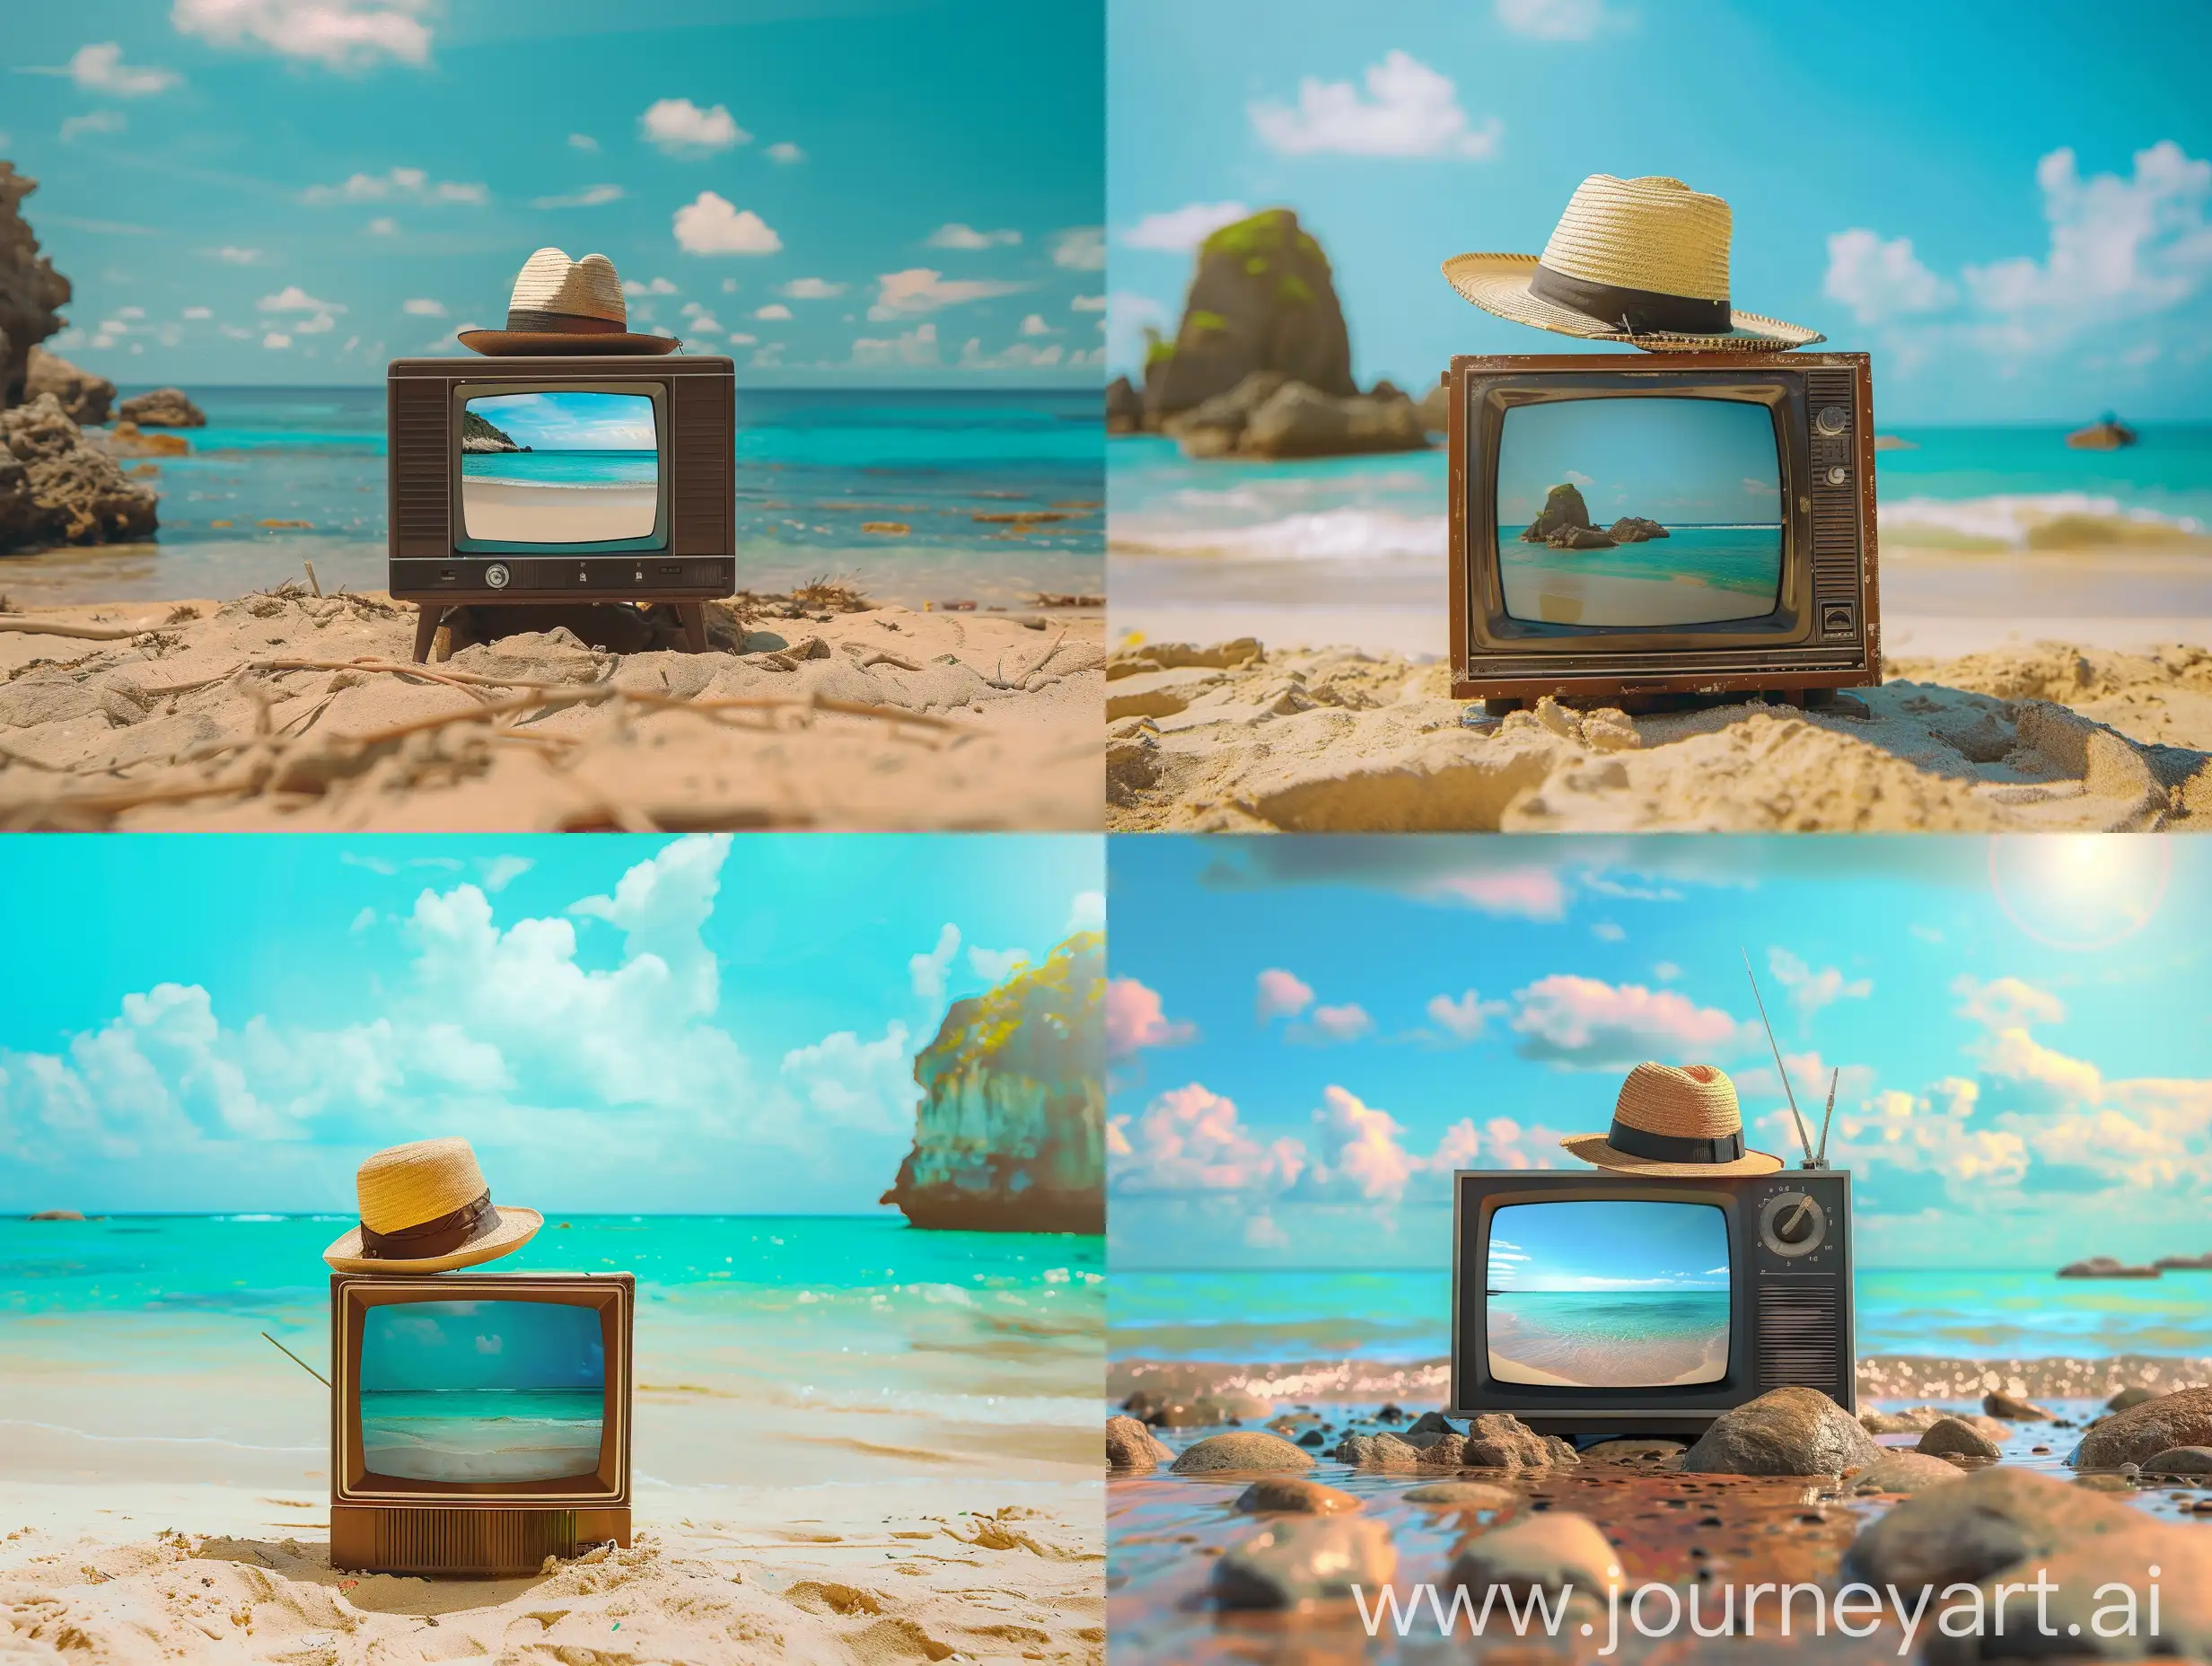 An old TV stands in the center of the picture in the middle of the beach, in the sand itself, with a Panama hat on top. The sea is on the screen. The background also includes the sea, sun, colorful blue sky and rocks